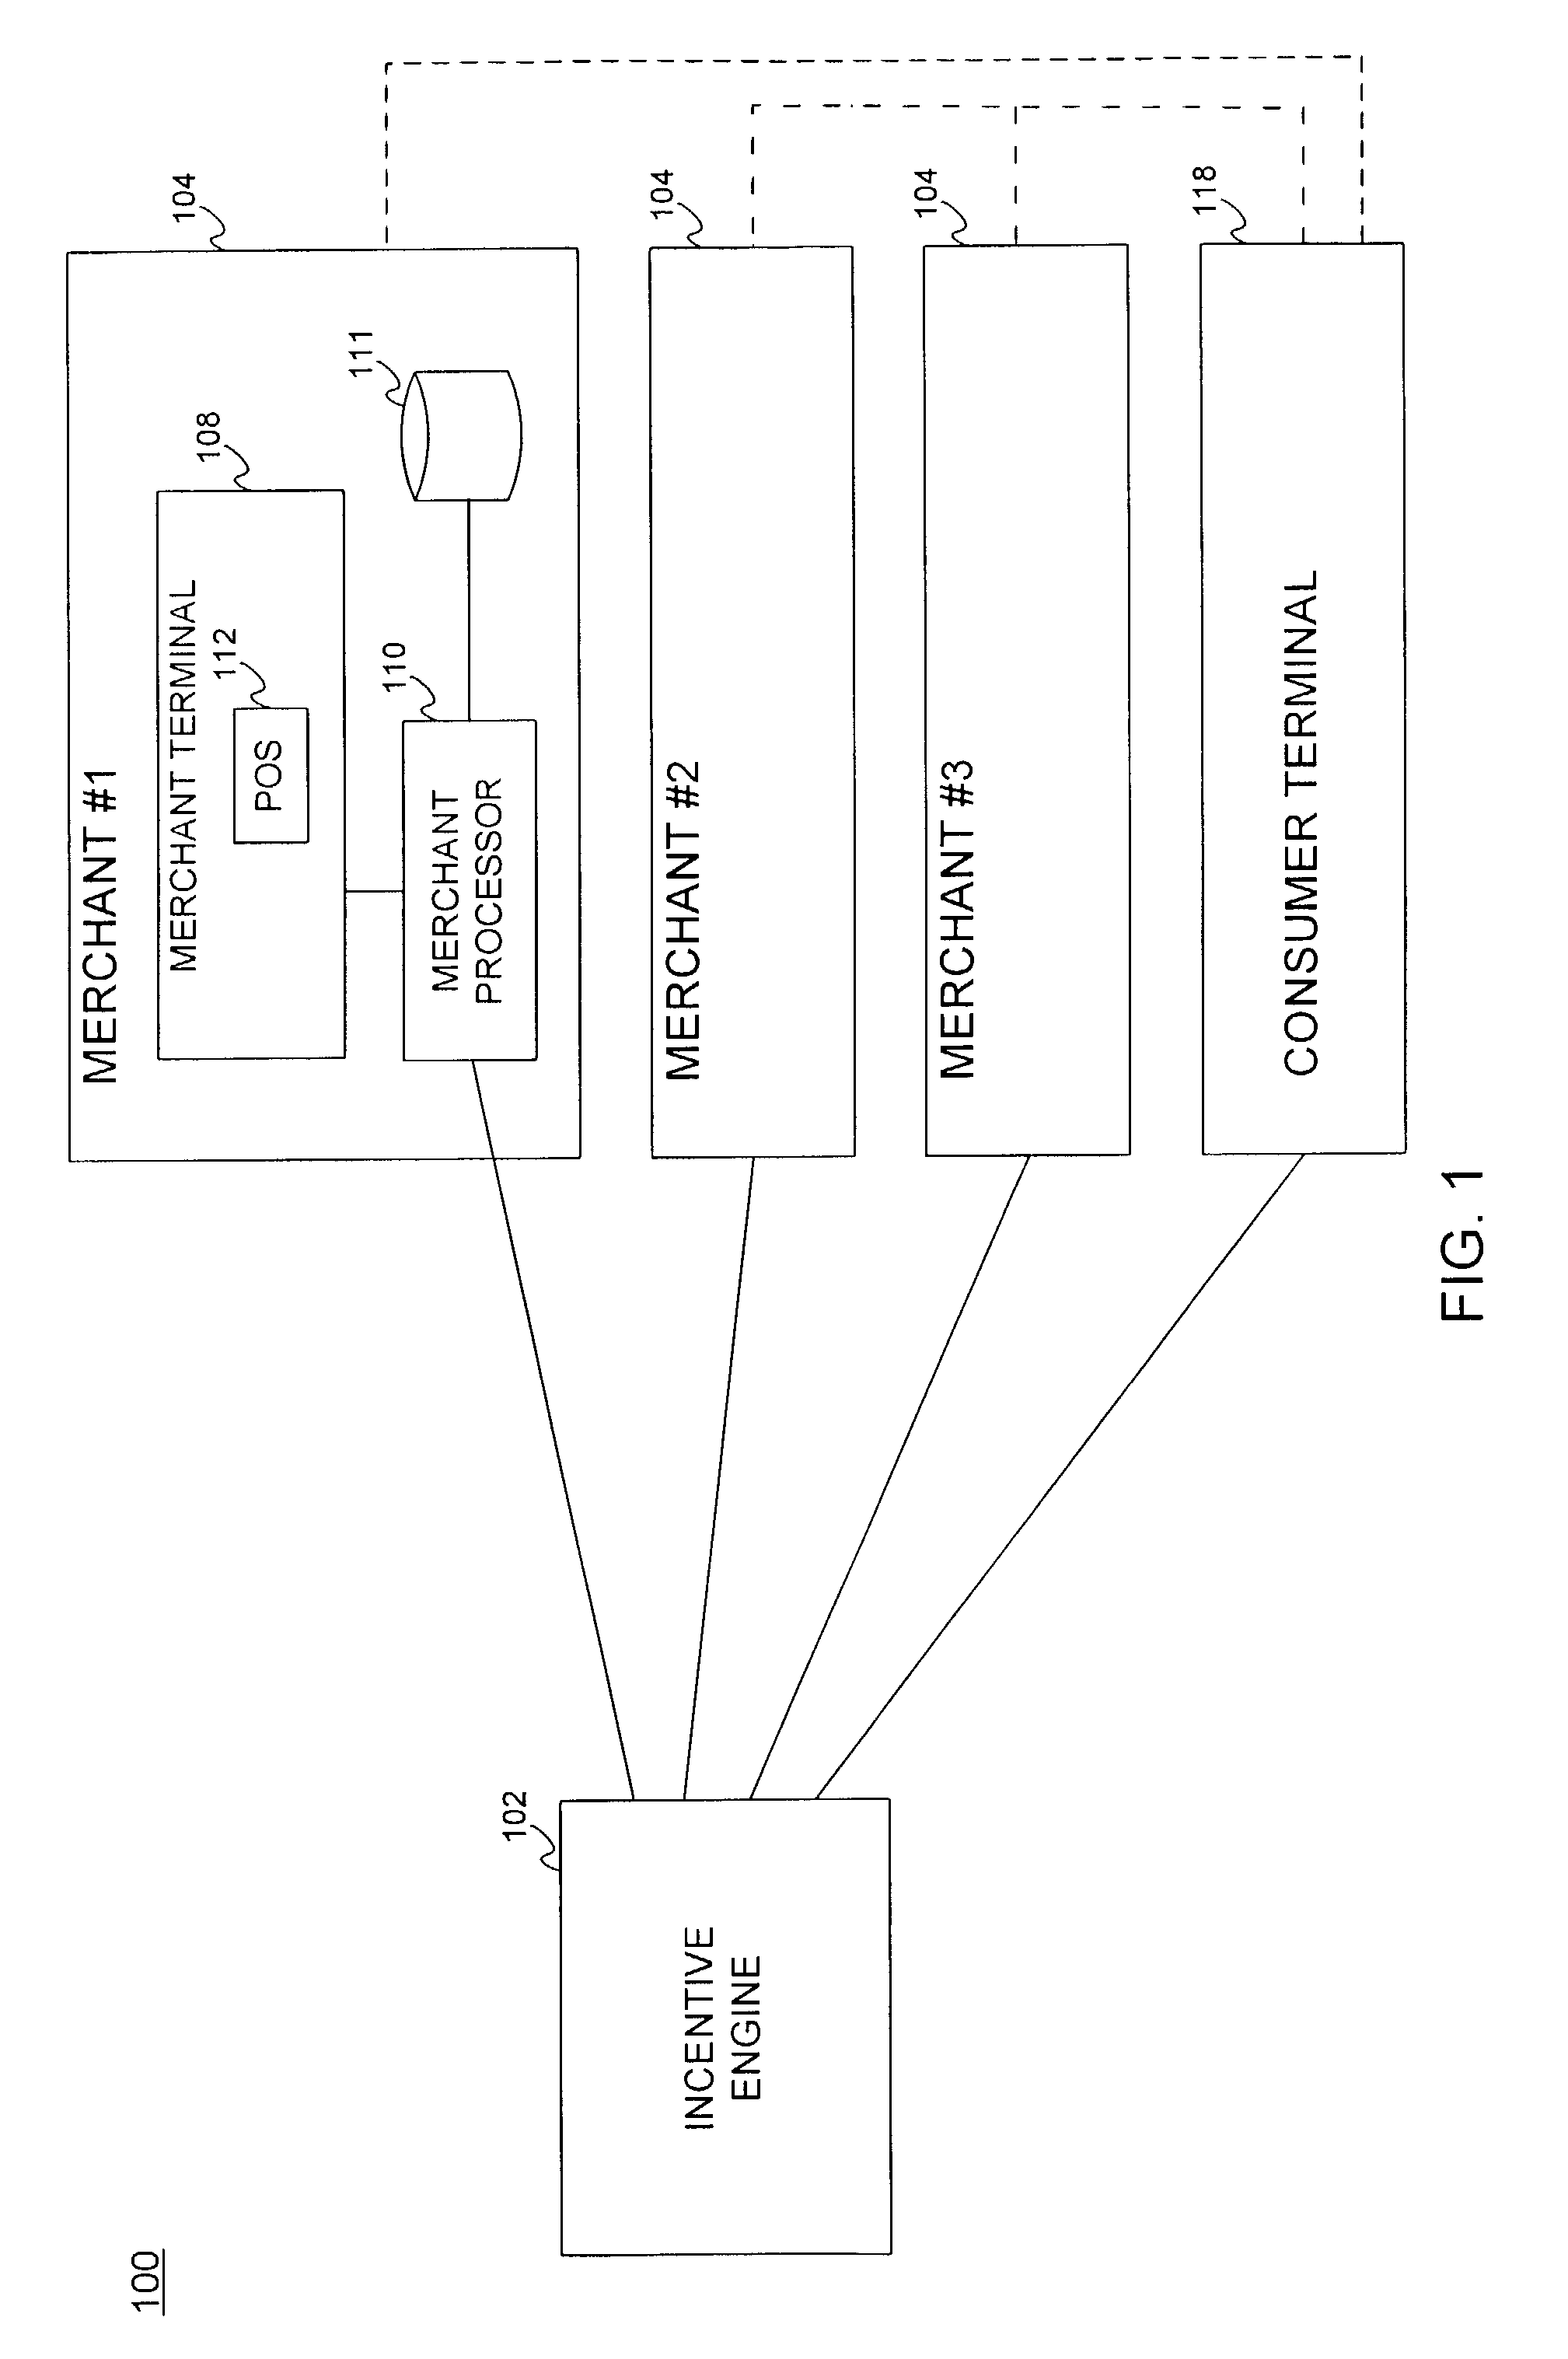 System and method for a multiple merchant stored value card